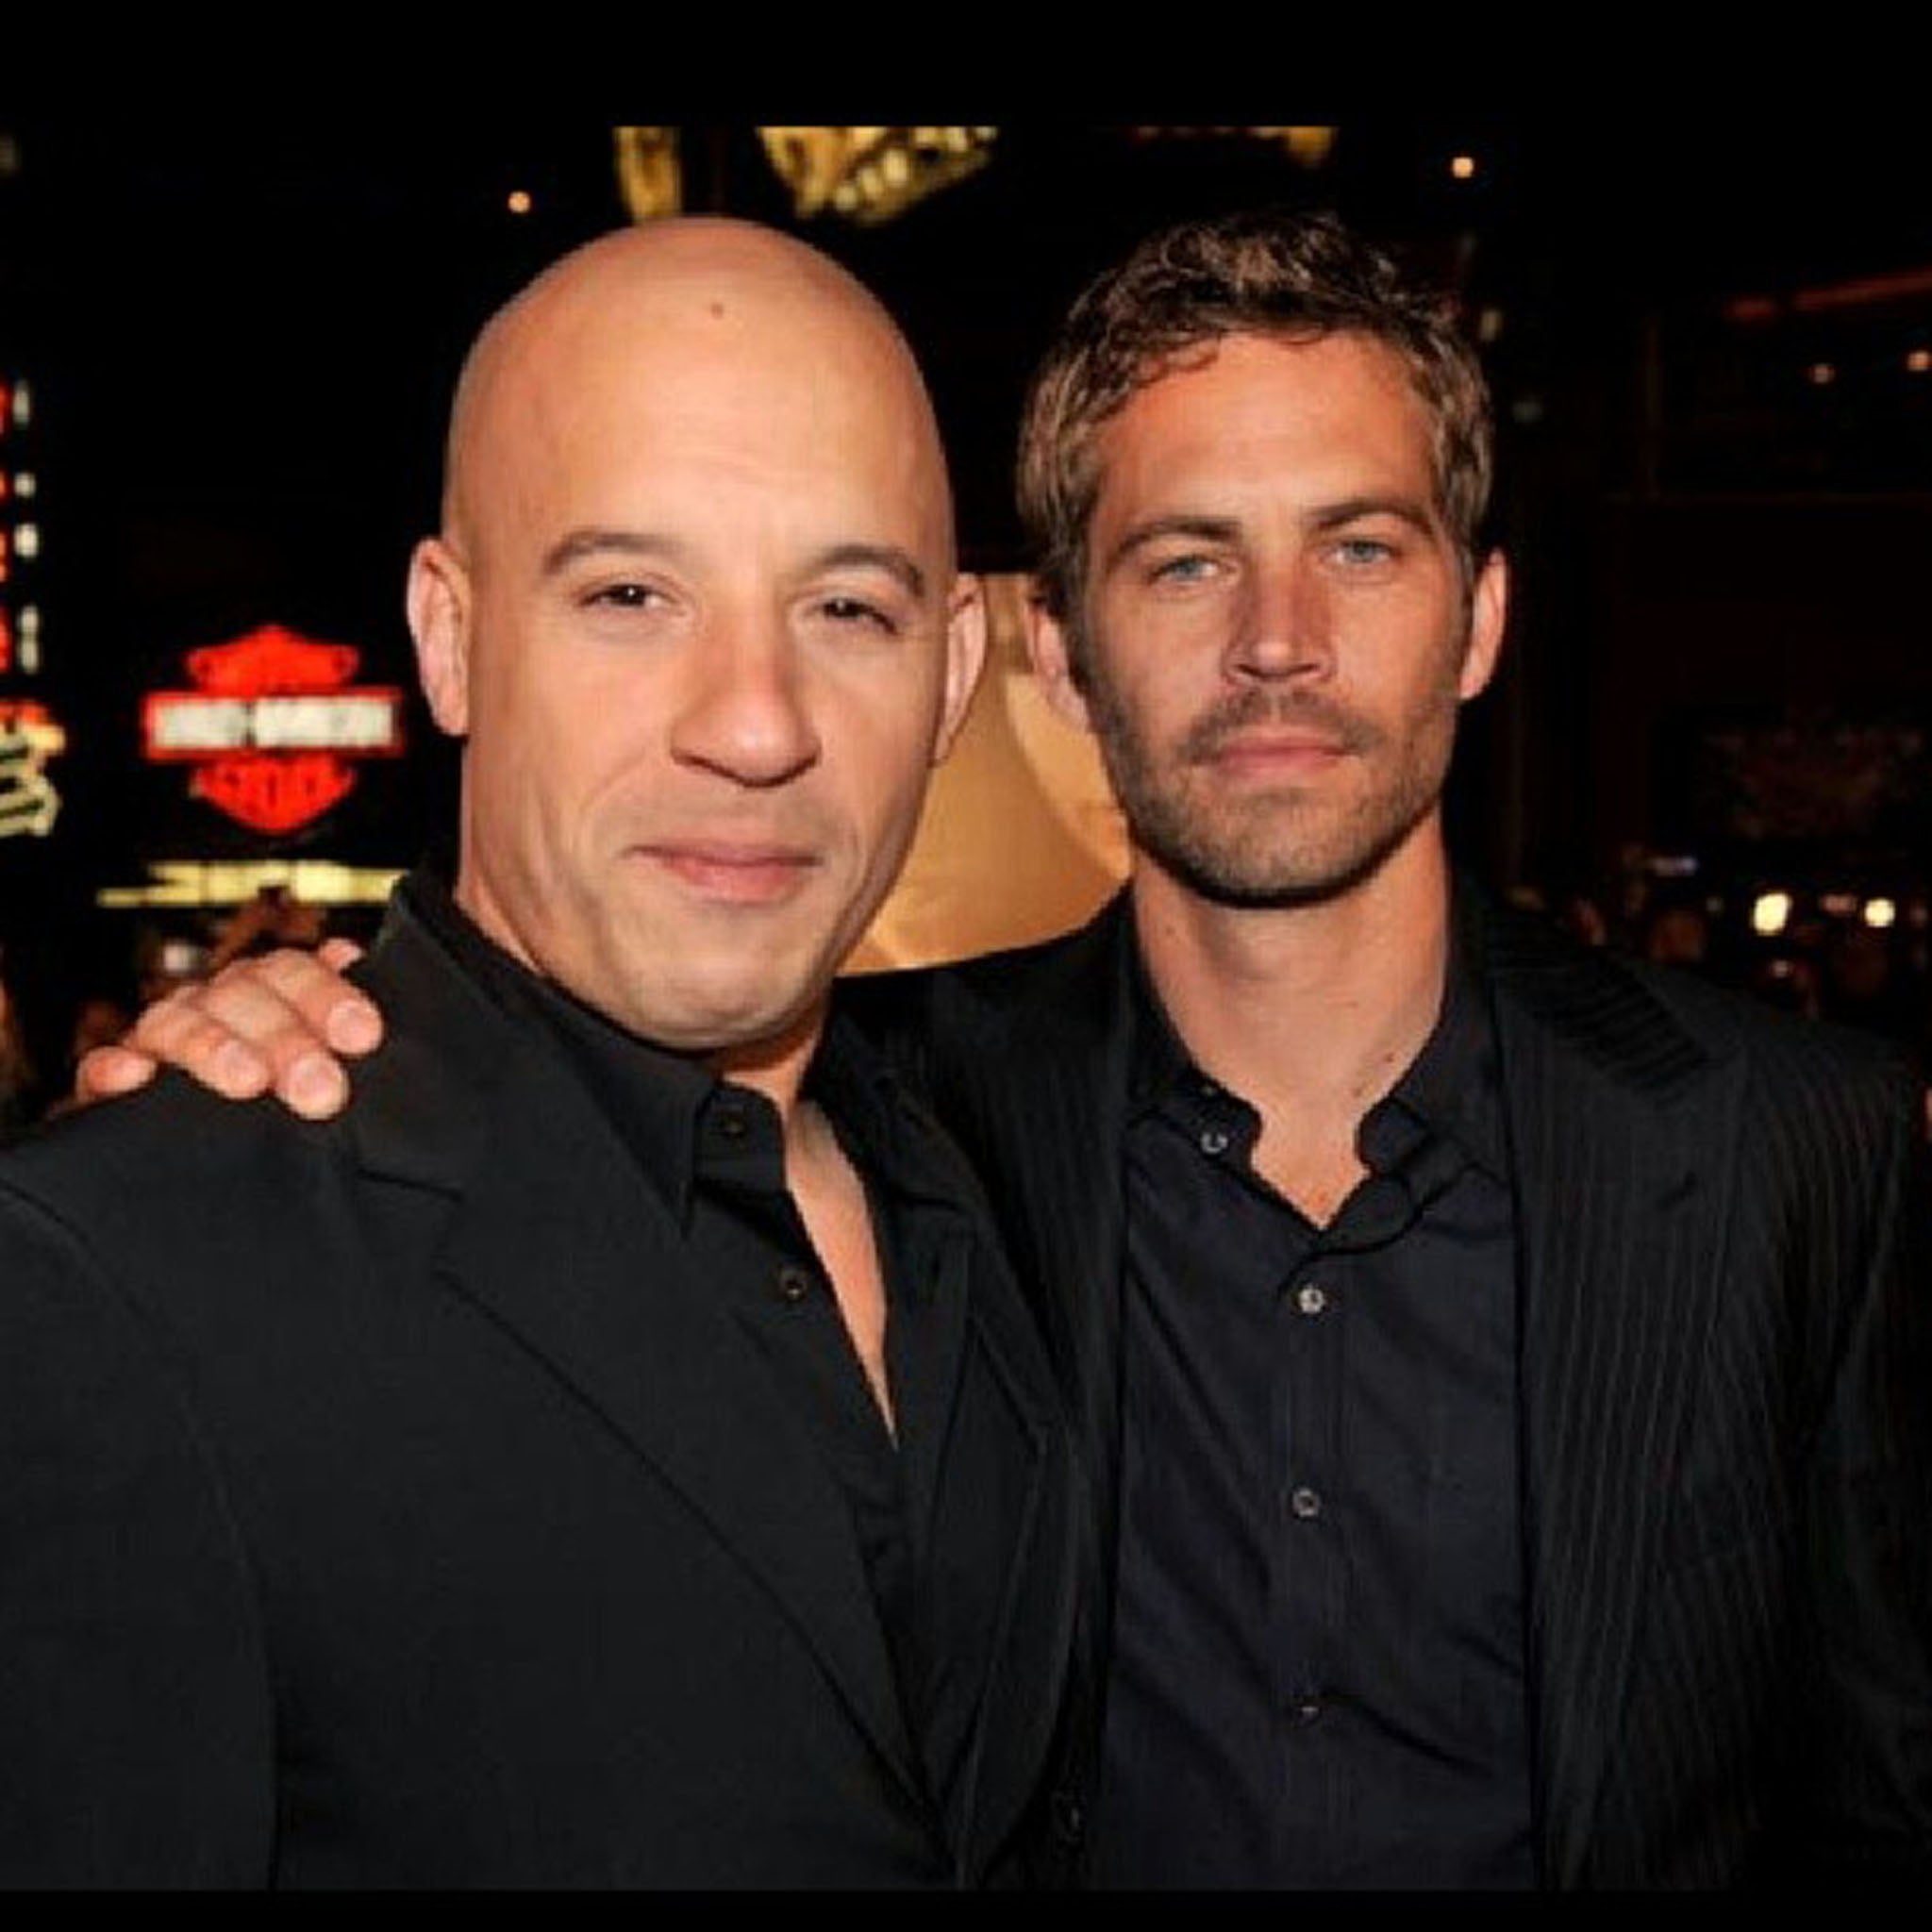 Vin Diesel posted this photo of himself with Paul Walker on Instagram after hearing about his co-star's tragic death